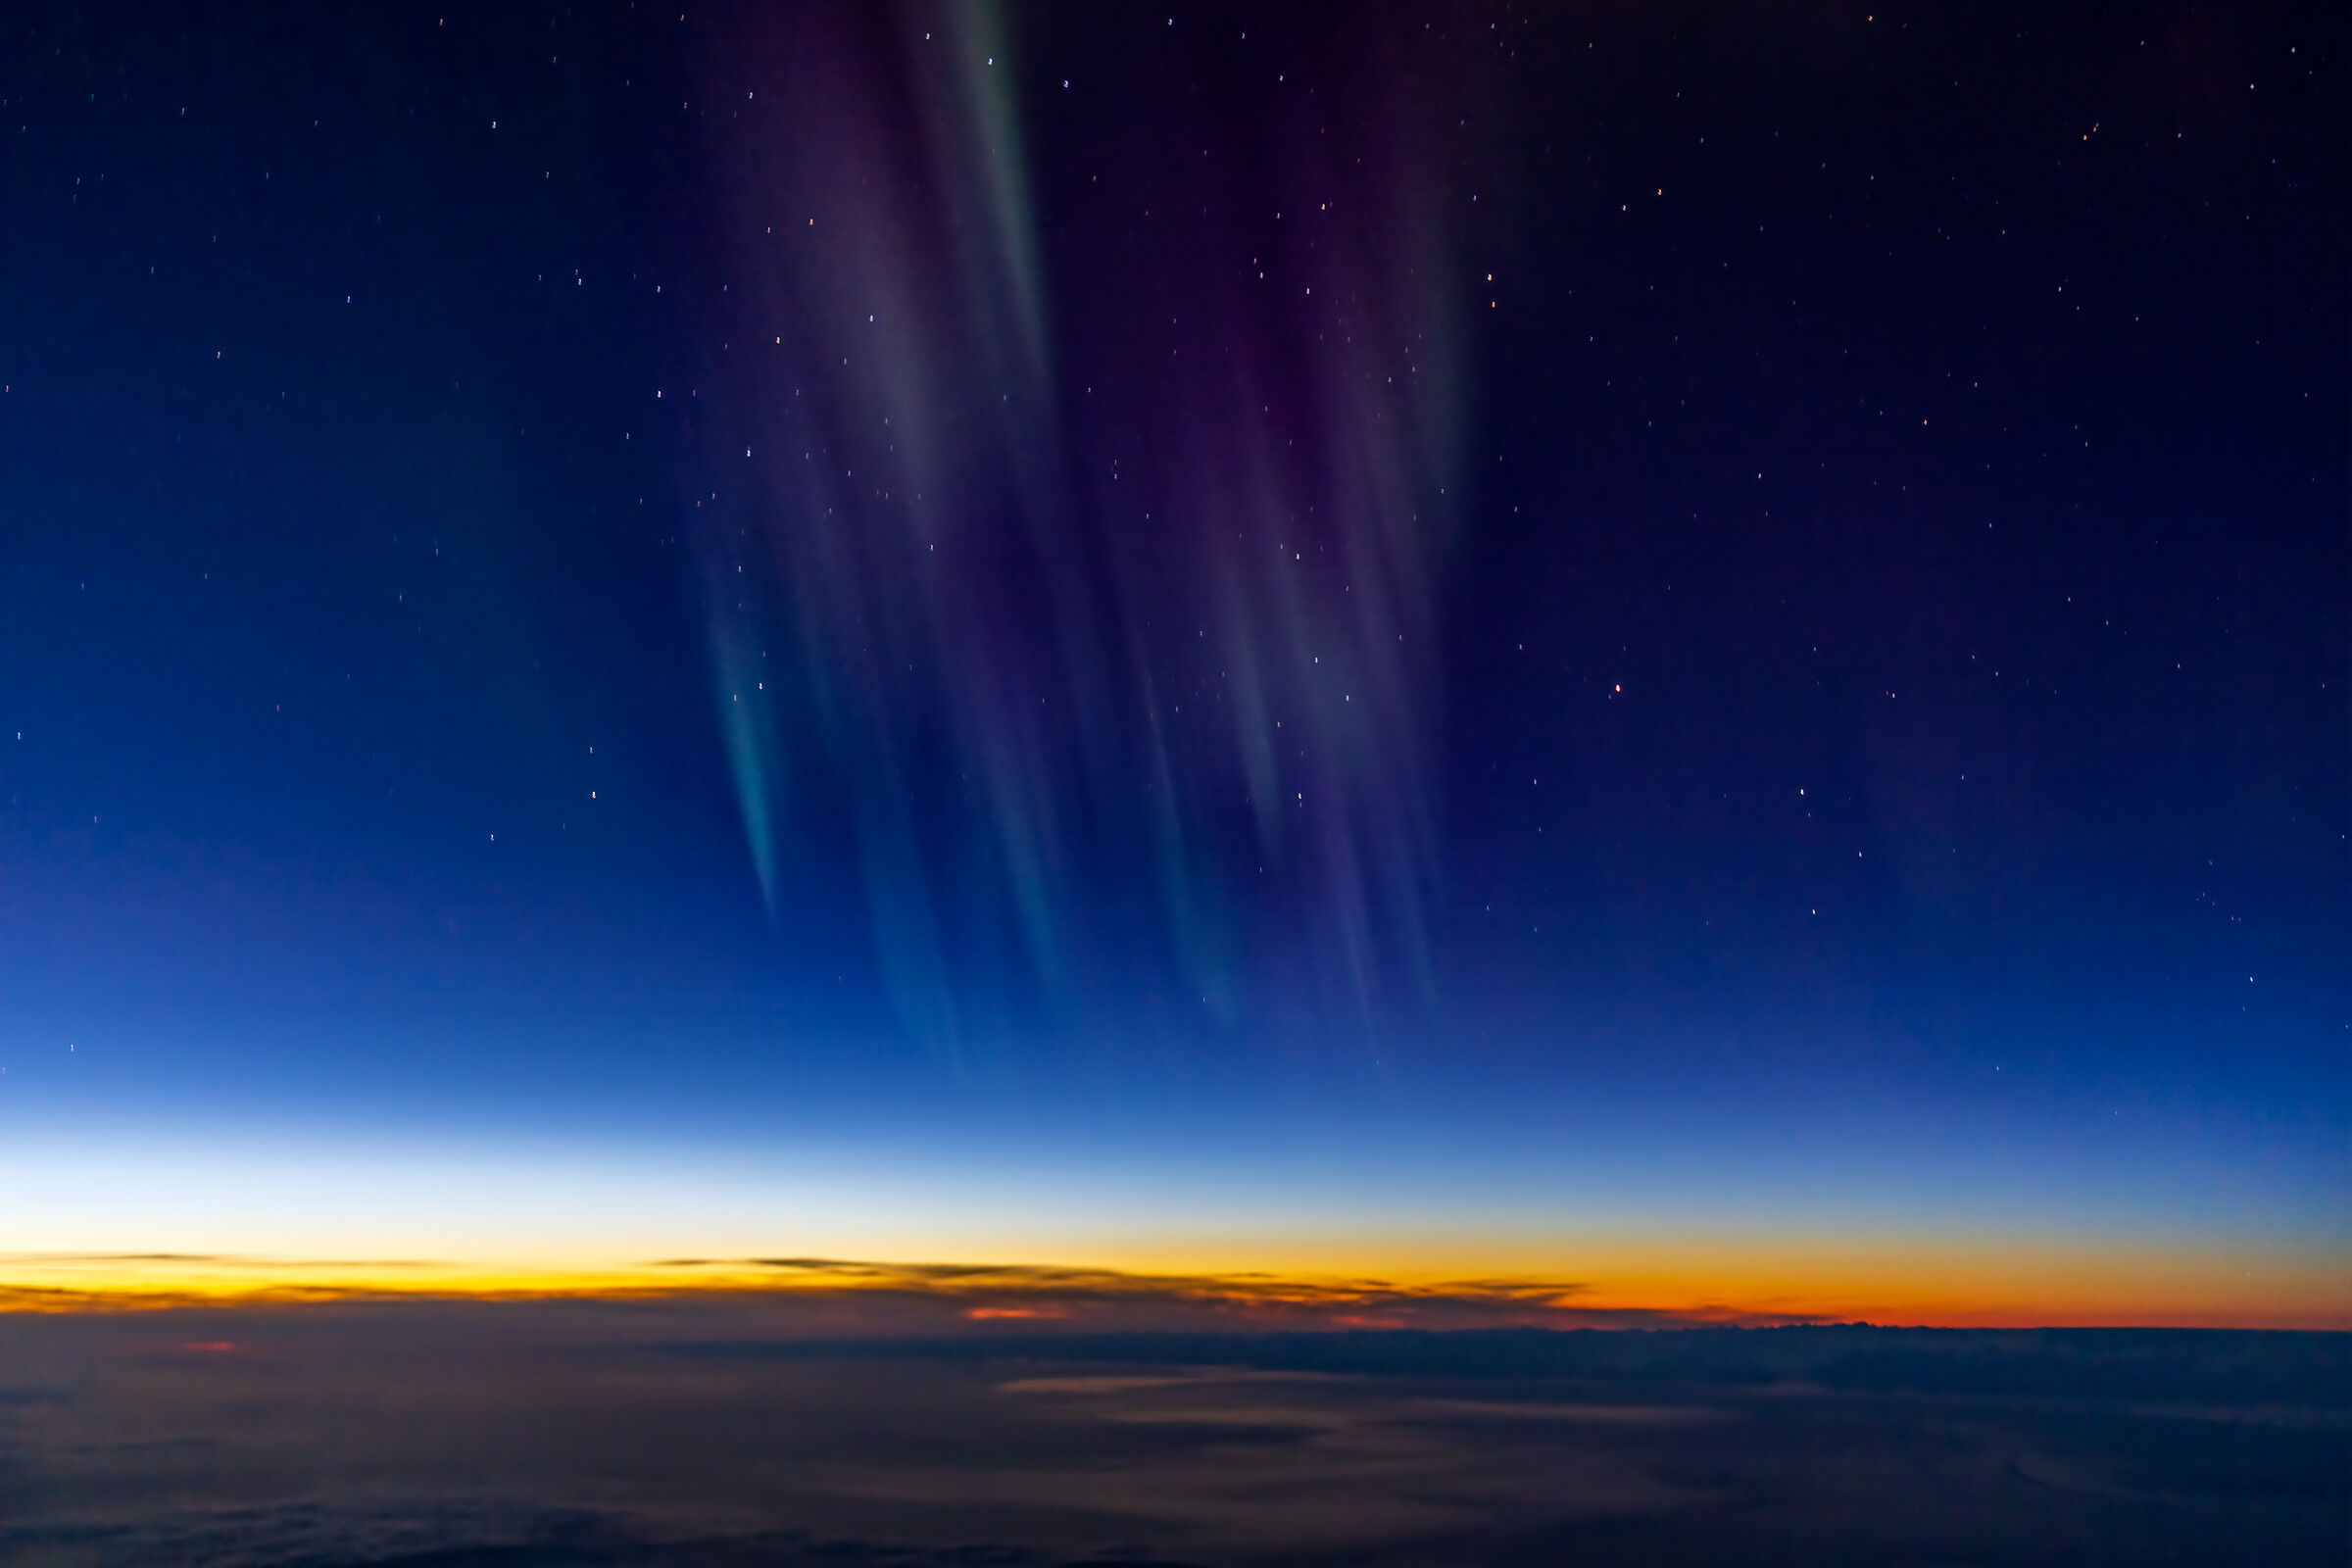 Borealis 66N over Greenland (sunset time) ...